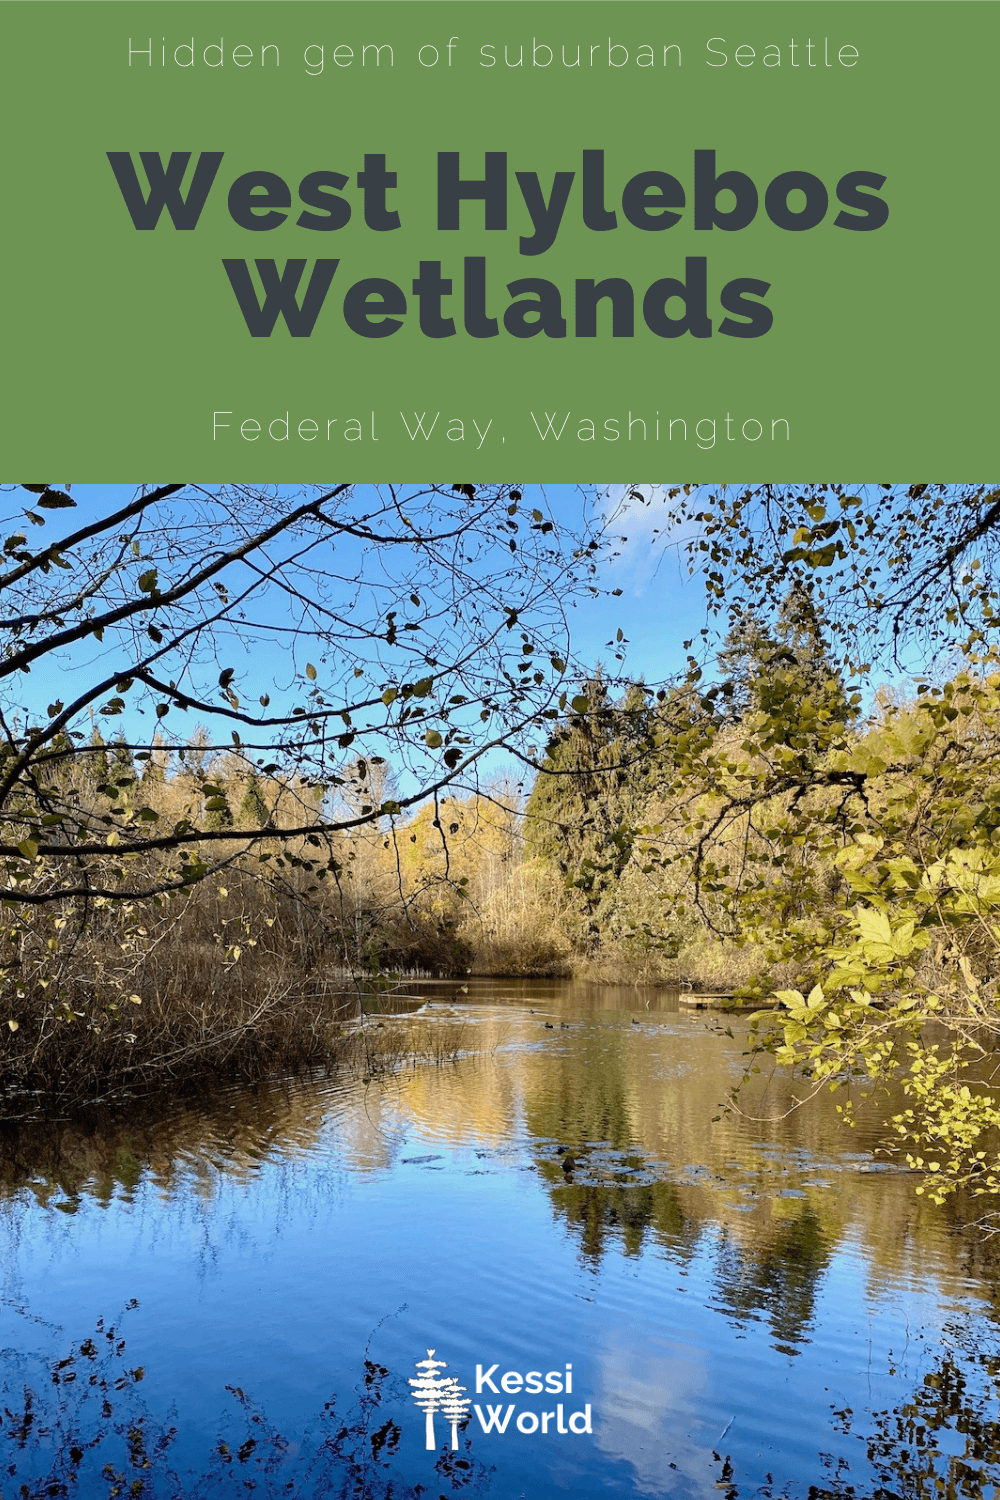 Pinterest tile showing the placid Bluewater lake of West Hylebos Wetlands Park in Federal Way. The blue sky reflects off the water along with the brownish brush.